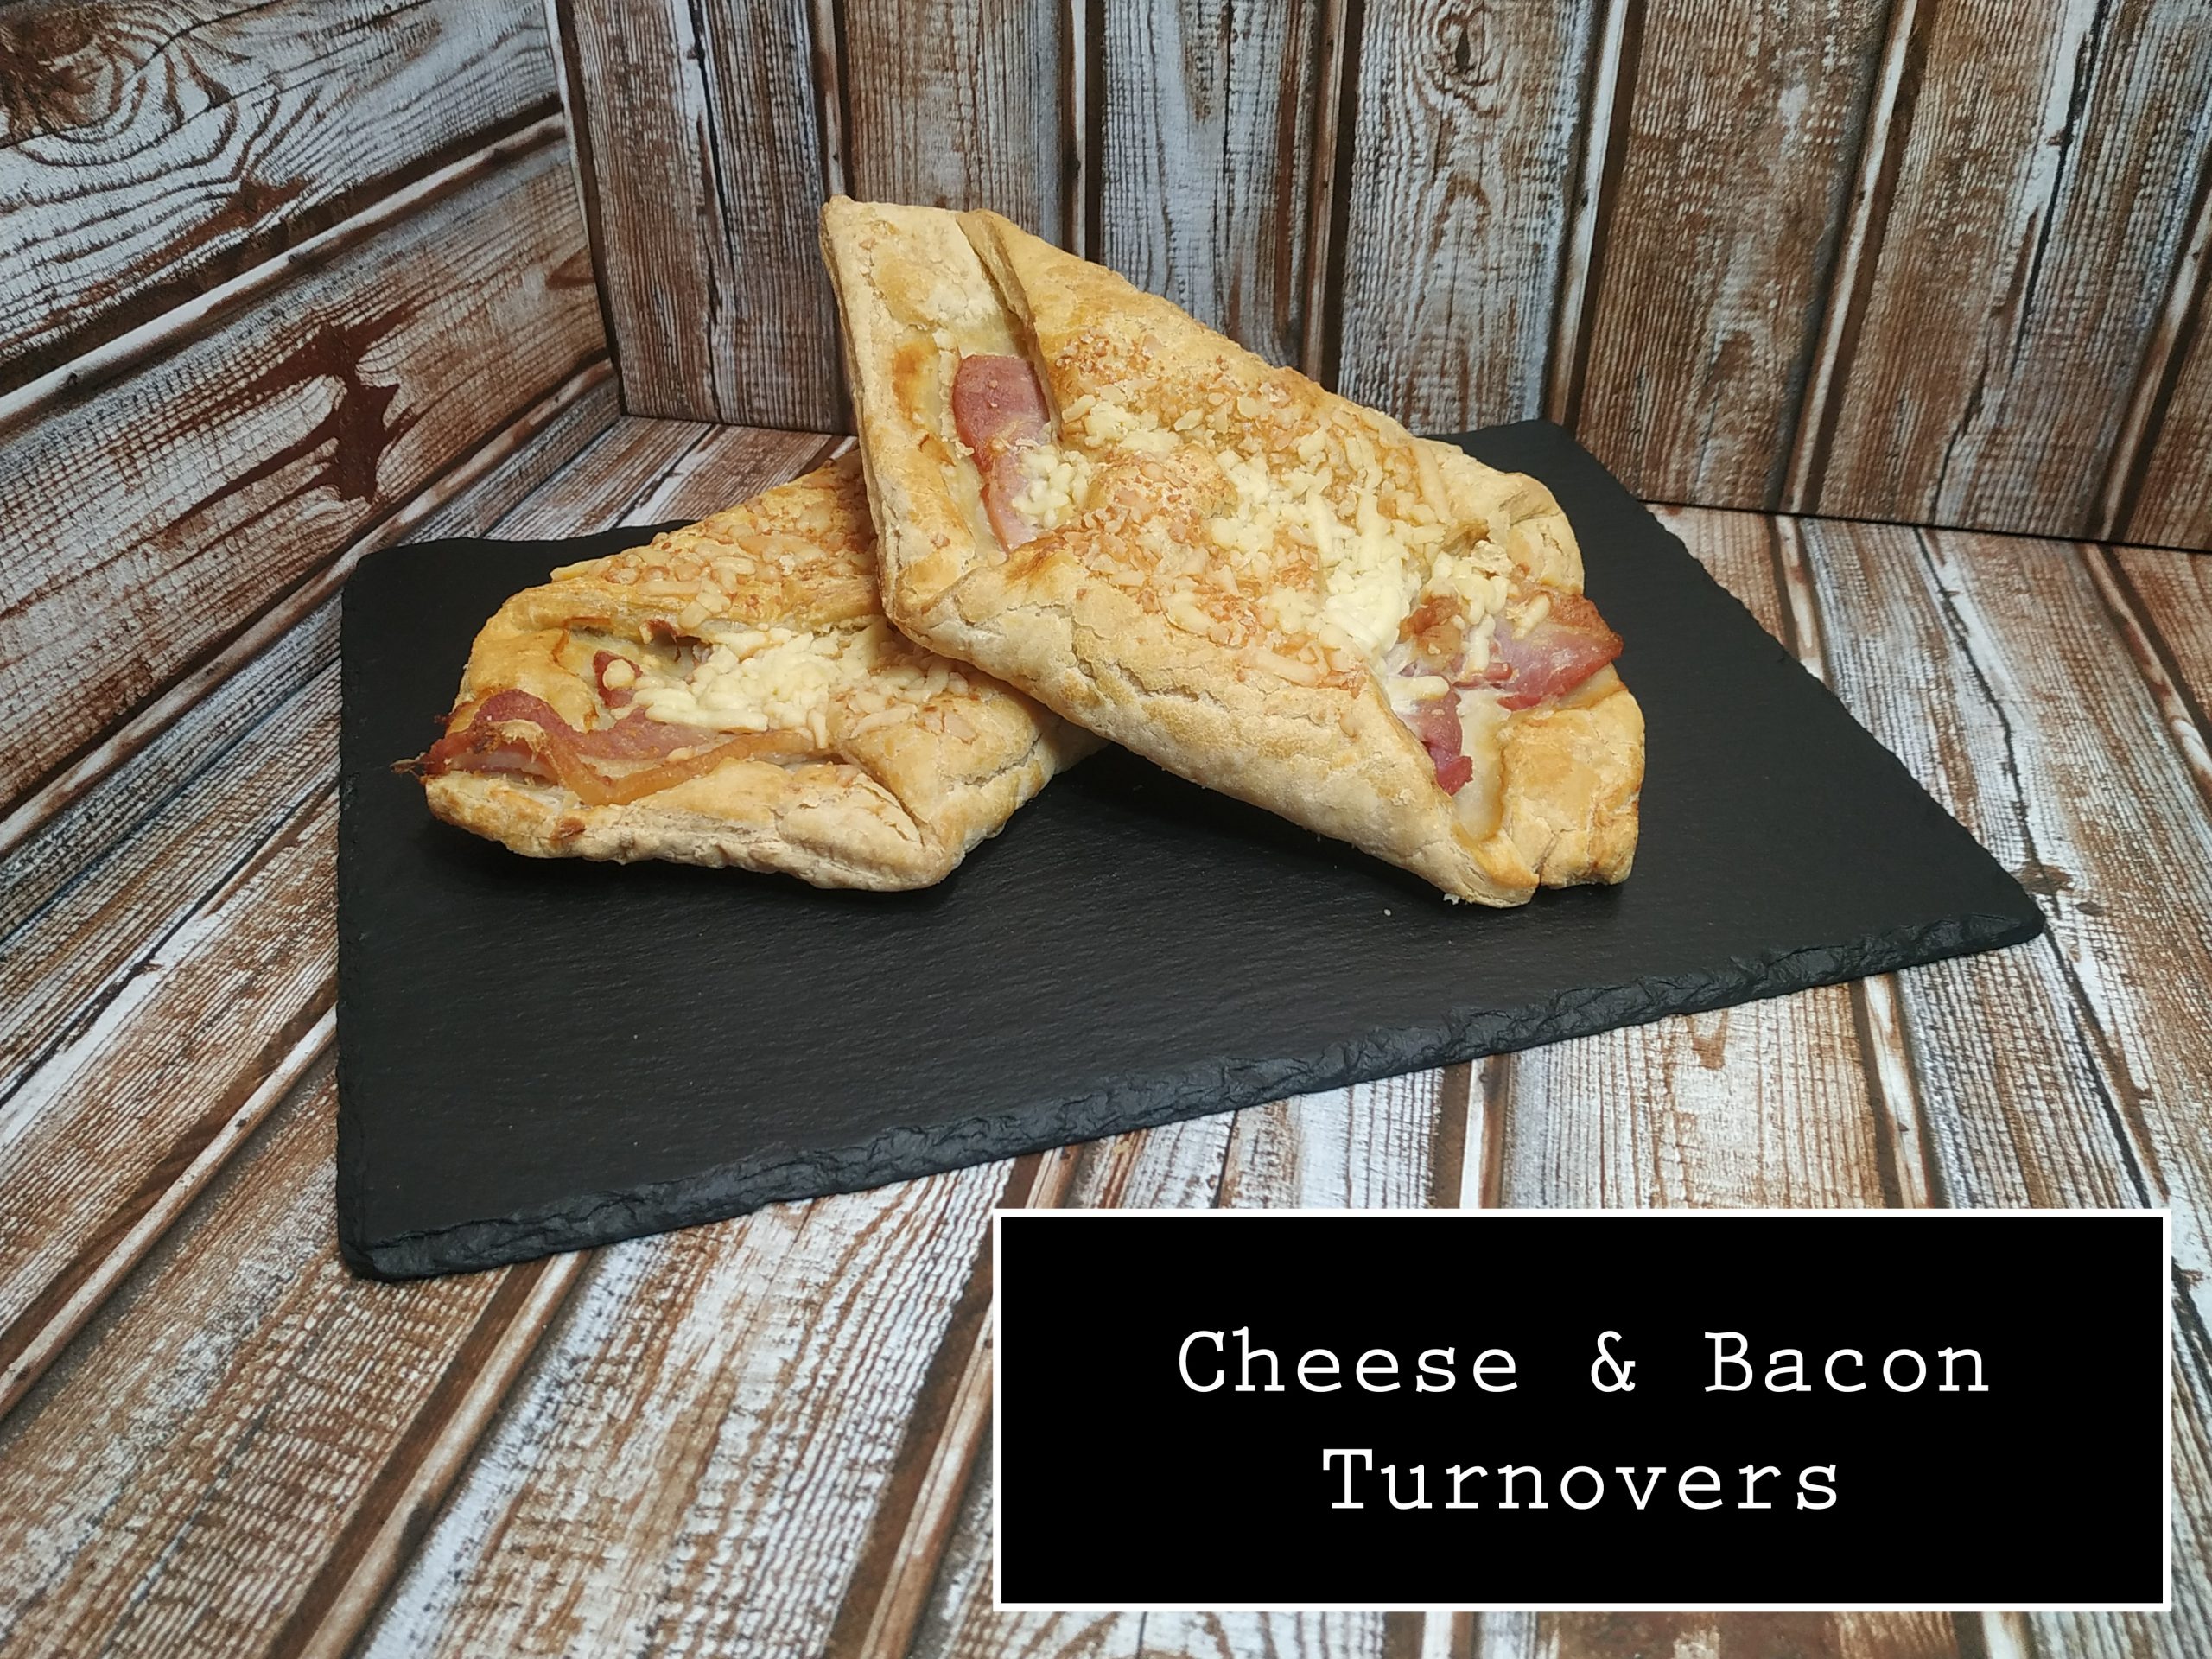 Cheese & Bacon Turnovers by Sandwich in the Square